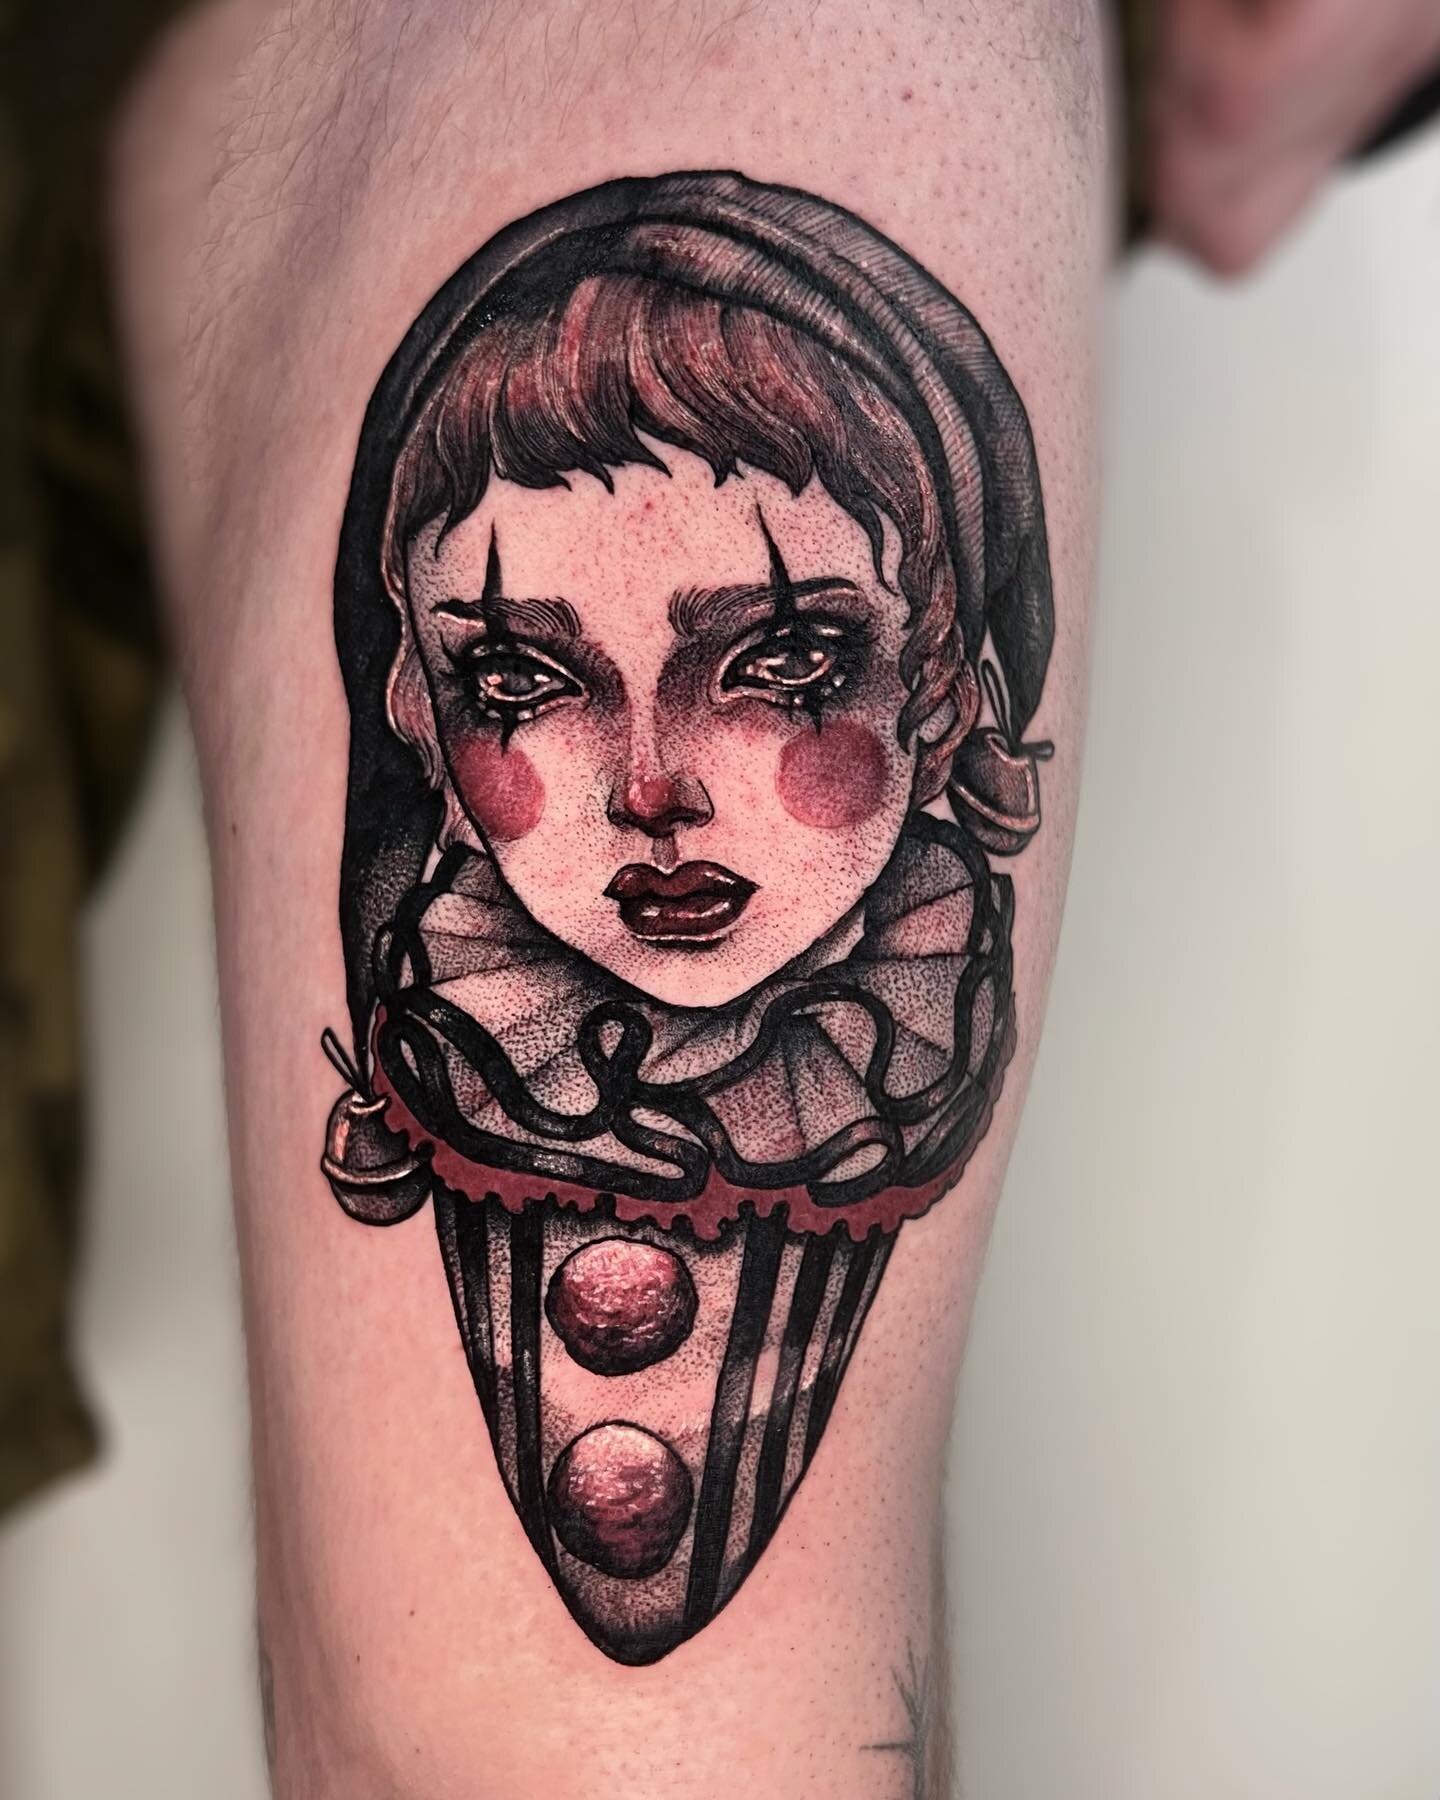 I would love to do more doll-like pieces with hints of color! 🖤🤡 
✖️ Done at @sharktooth_tattoo ✖️
.
.
.
.
@industryinks
@hivecaps 
@empireinks 
@fkirons 
@goodguysupply 
.
.
.
.
.
.
.
.
.
.
.
.
.
.
#tattoo #tattoos #tattooartist #tattooed #tattooi